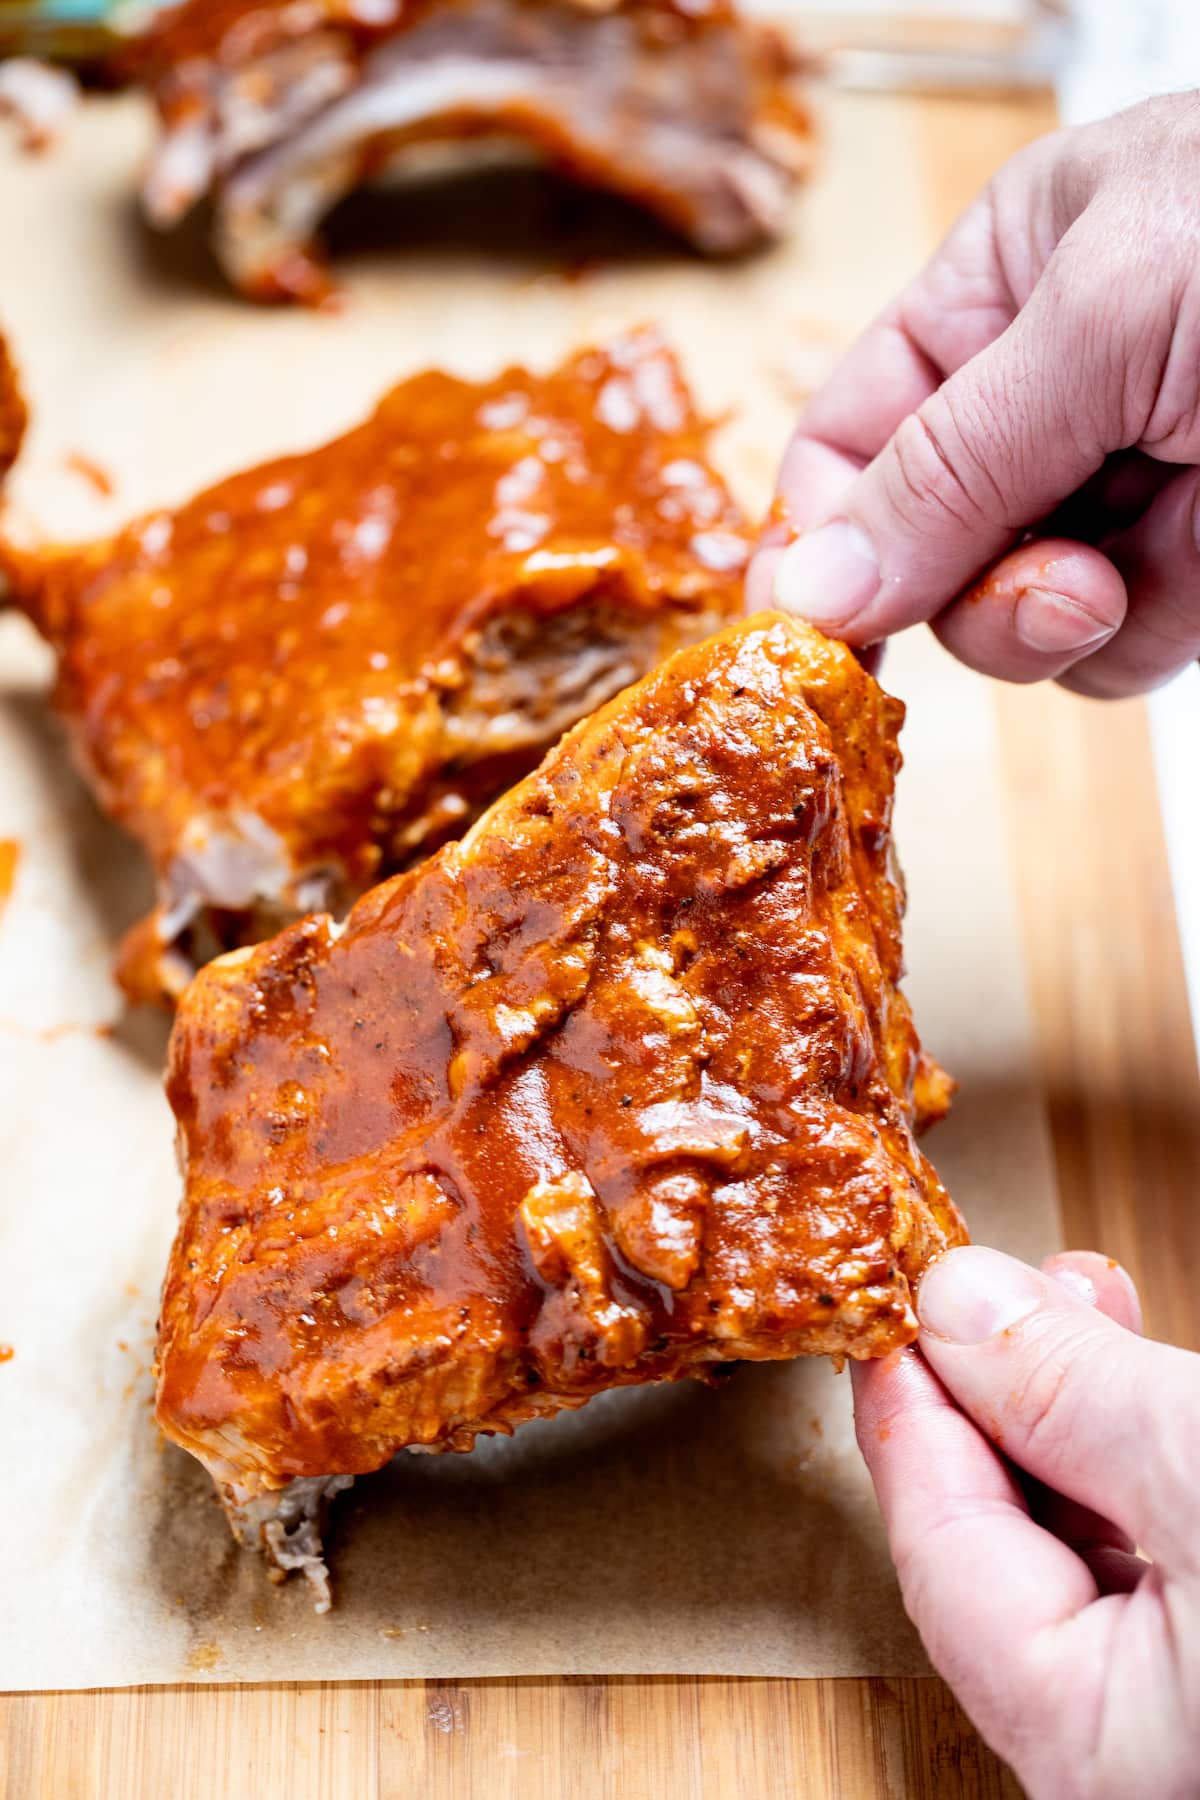 Two hands lifting up a section of pork spare ribs smothered in bbq sauce from a piece of parchment paper on a cutting board, with more sections of ribs in the background.